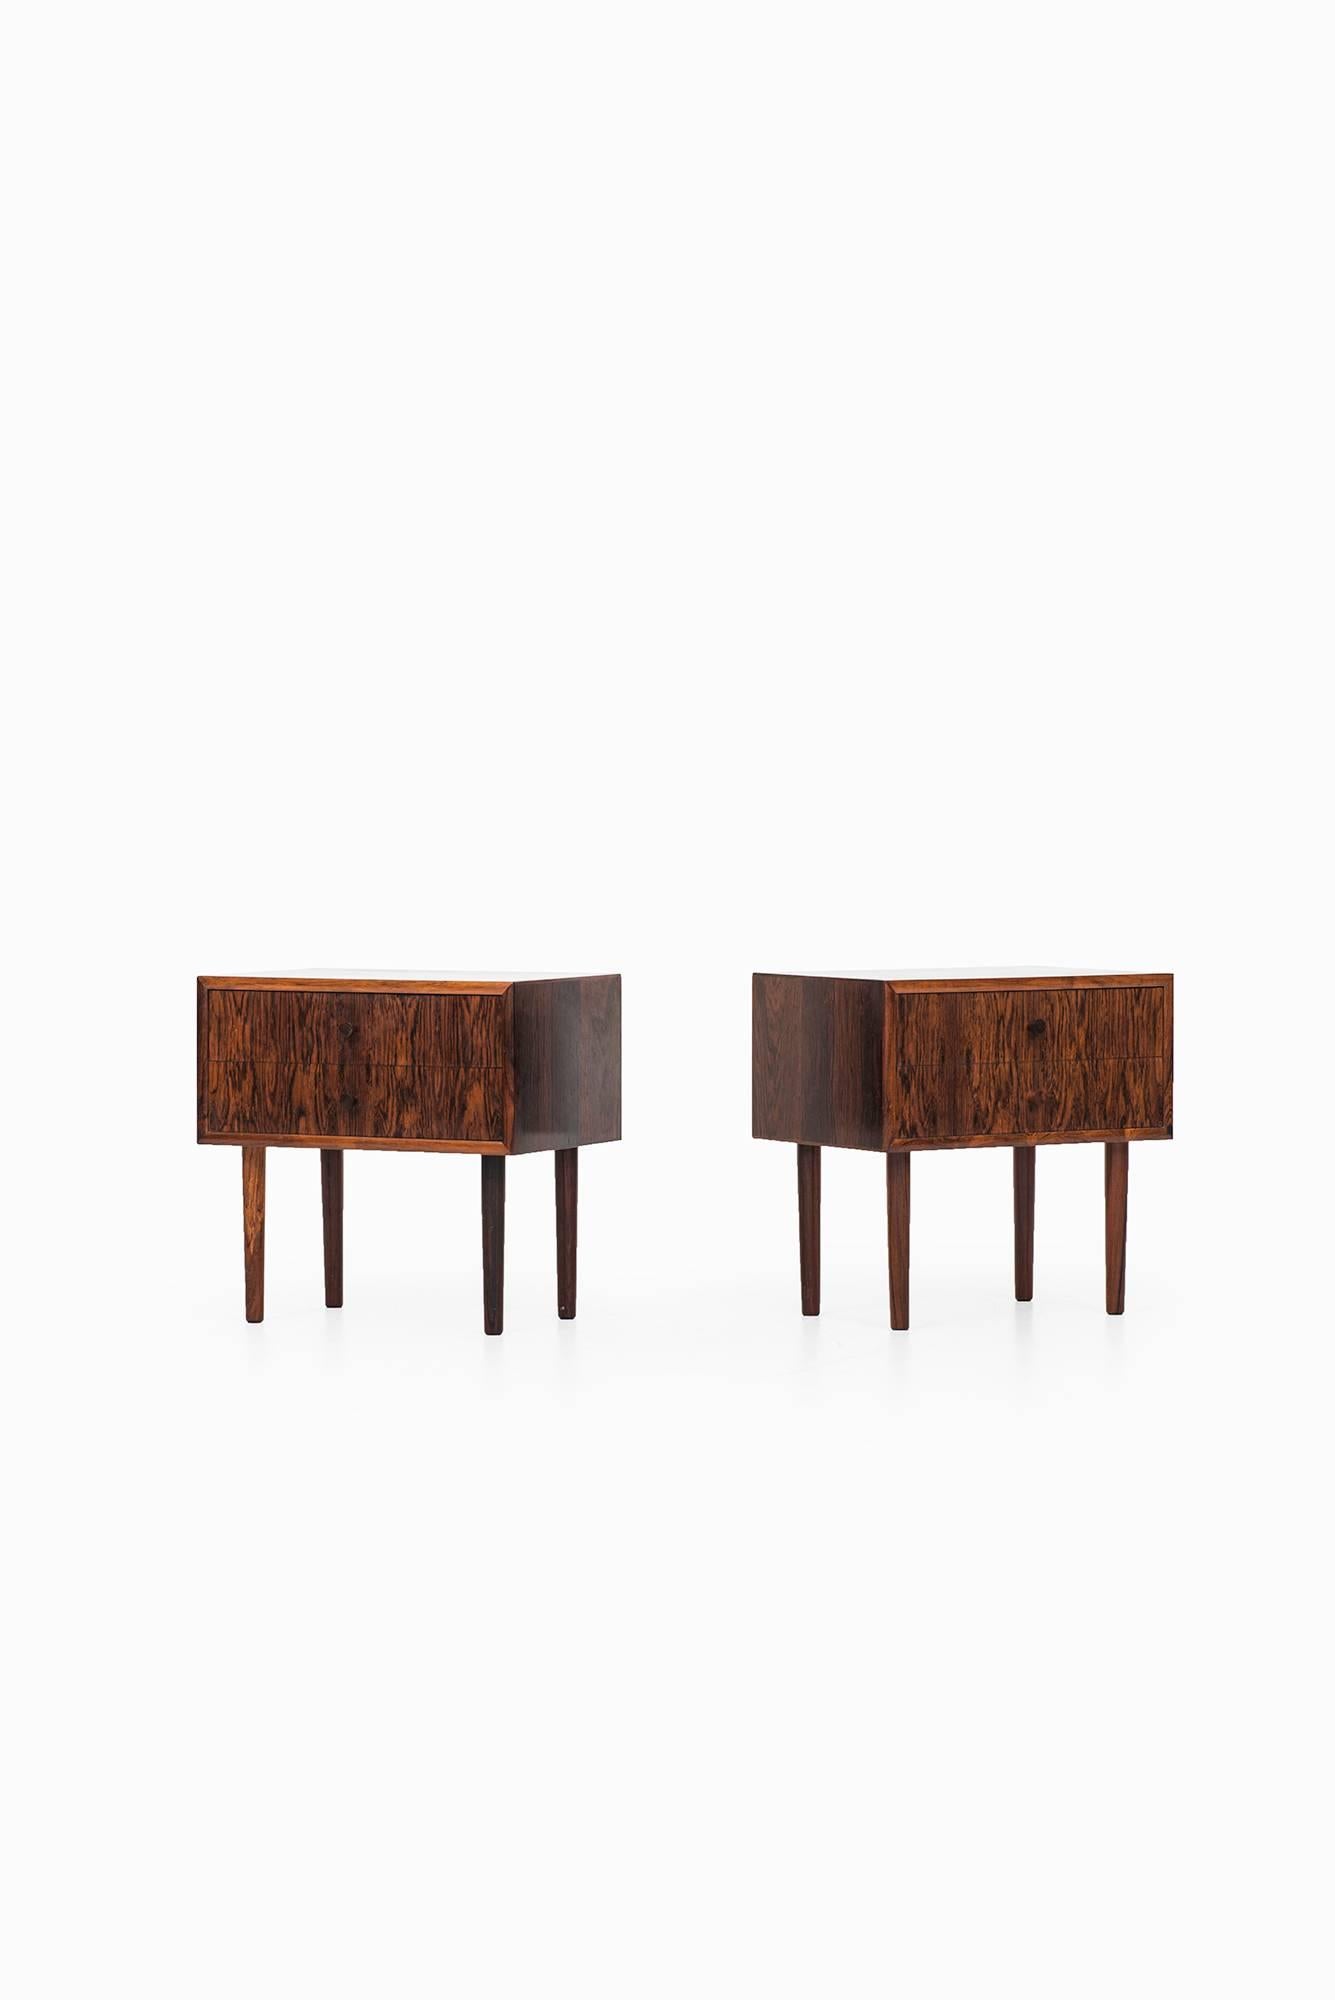 A pair of bedside tables / side tables in rosewood. Produced in Denmark.